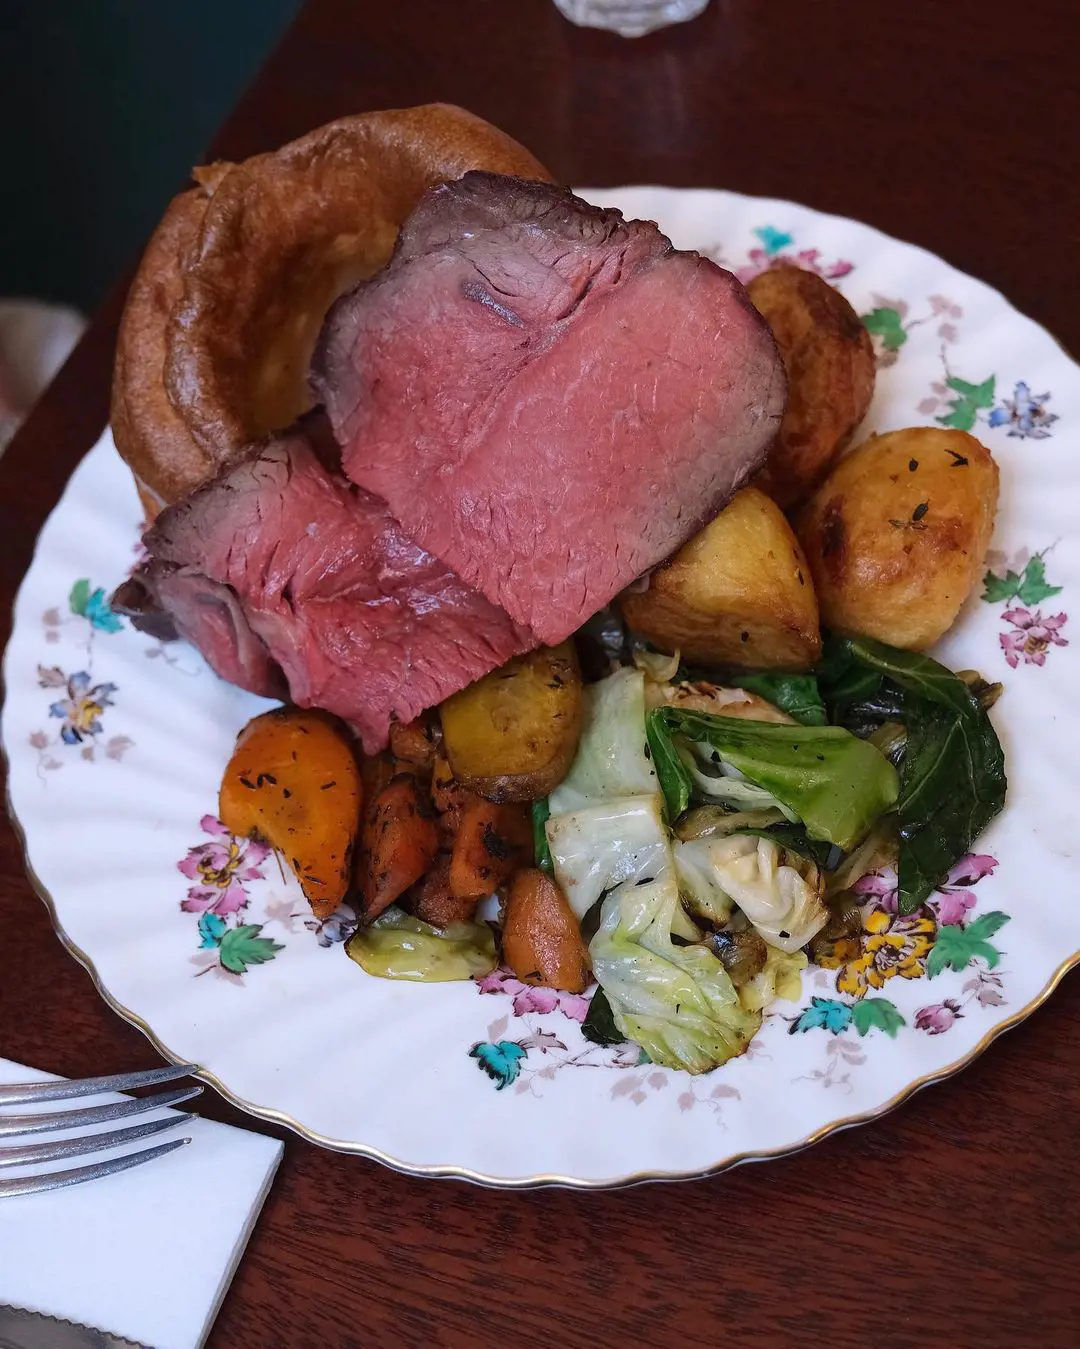 Beef Rump, a giant Yorkie and all the season trimmings